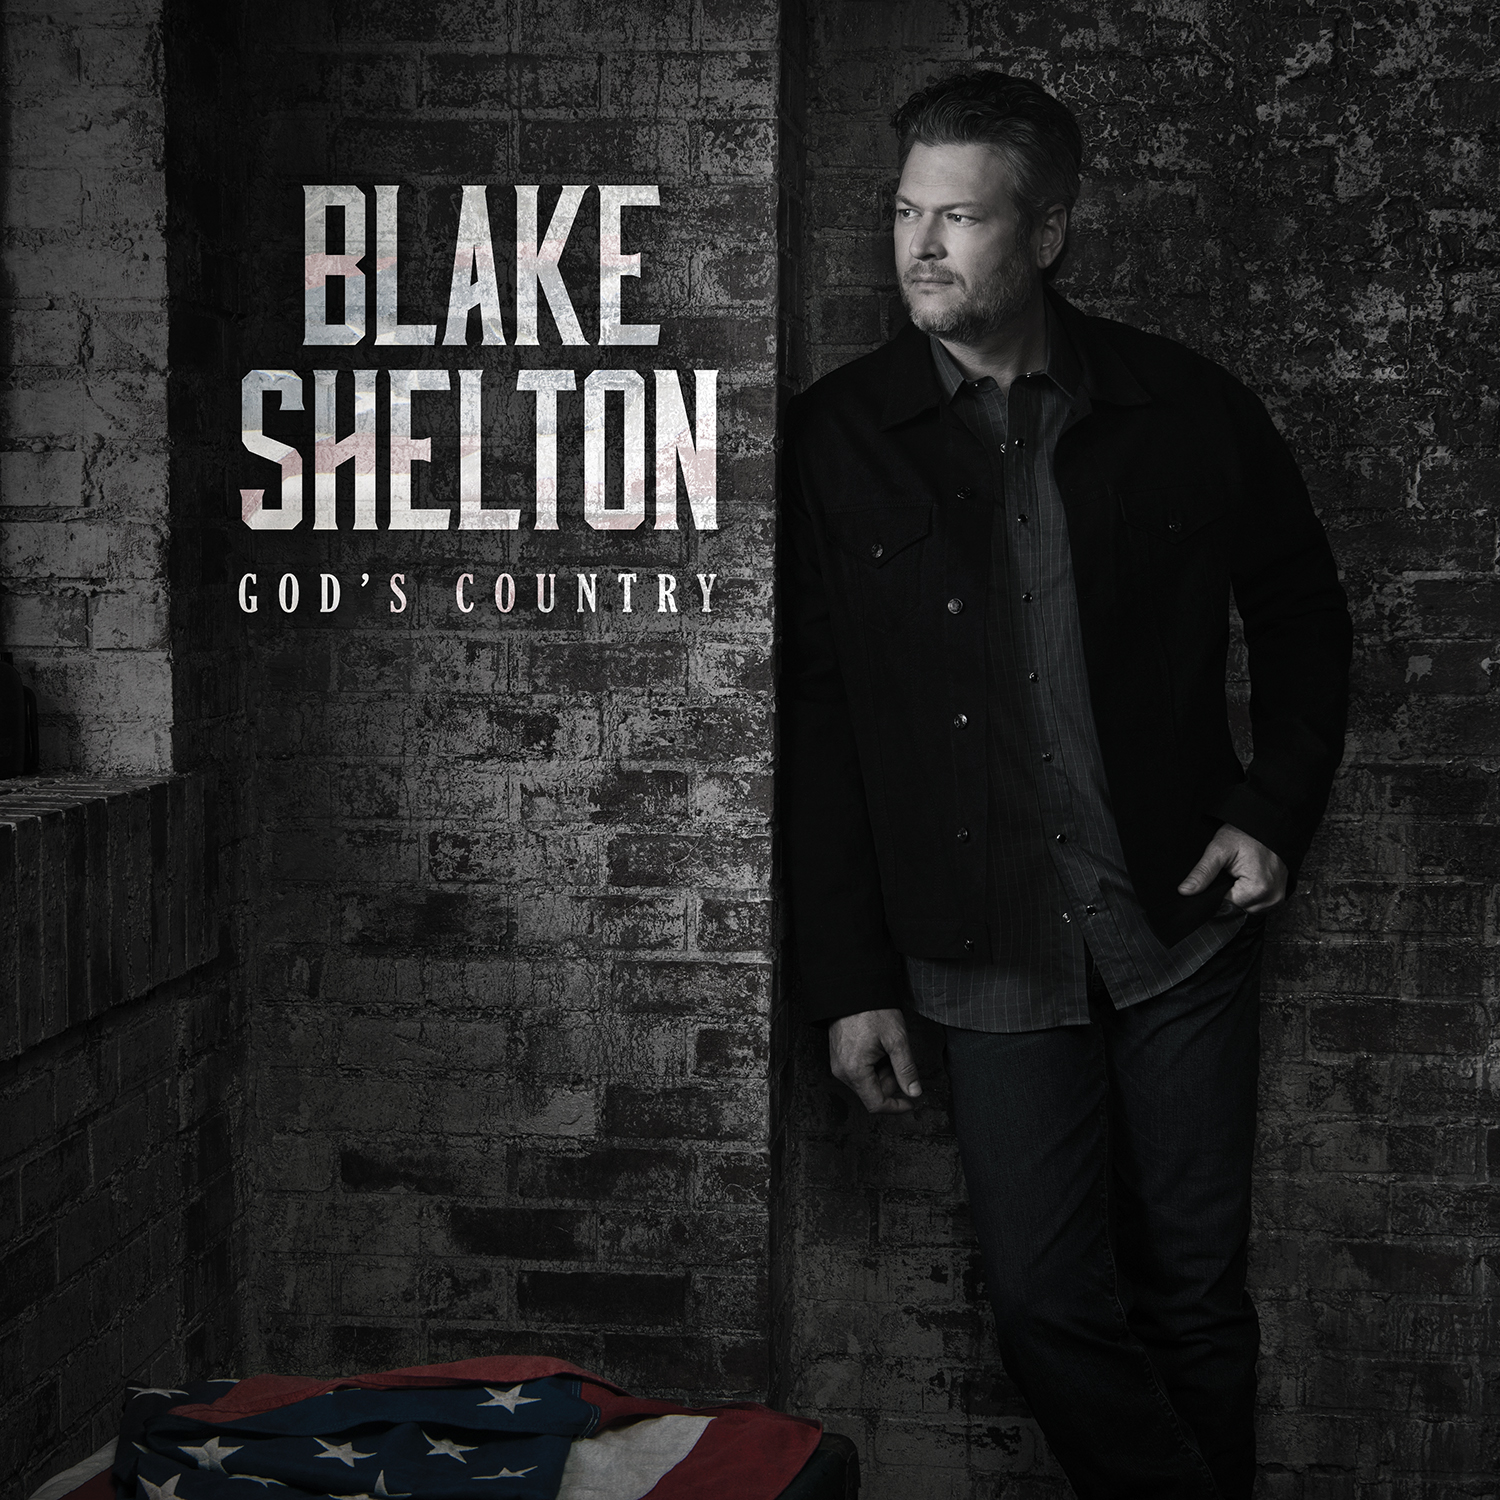 BLAKE SHELTON DEBUTS NEW SINGLE “GOD’S COUNTRY” ON MARCH 29